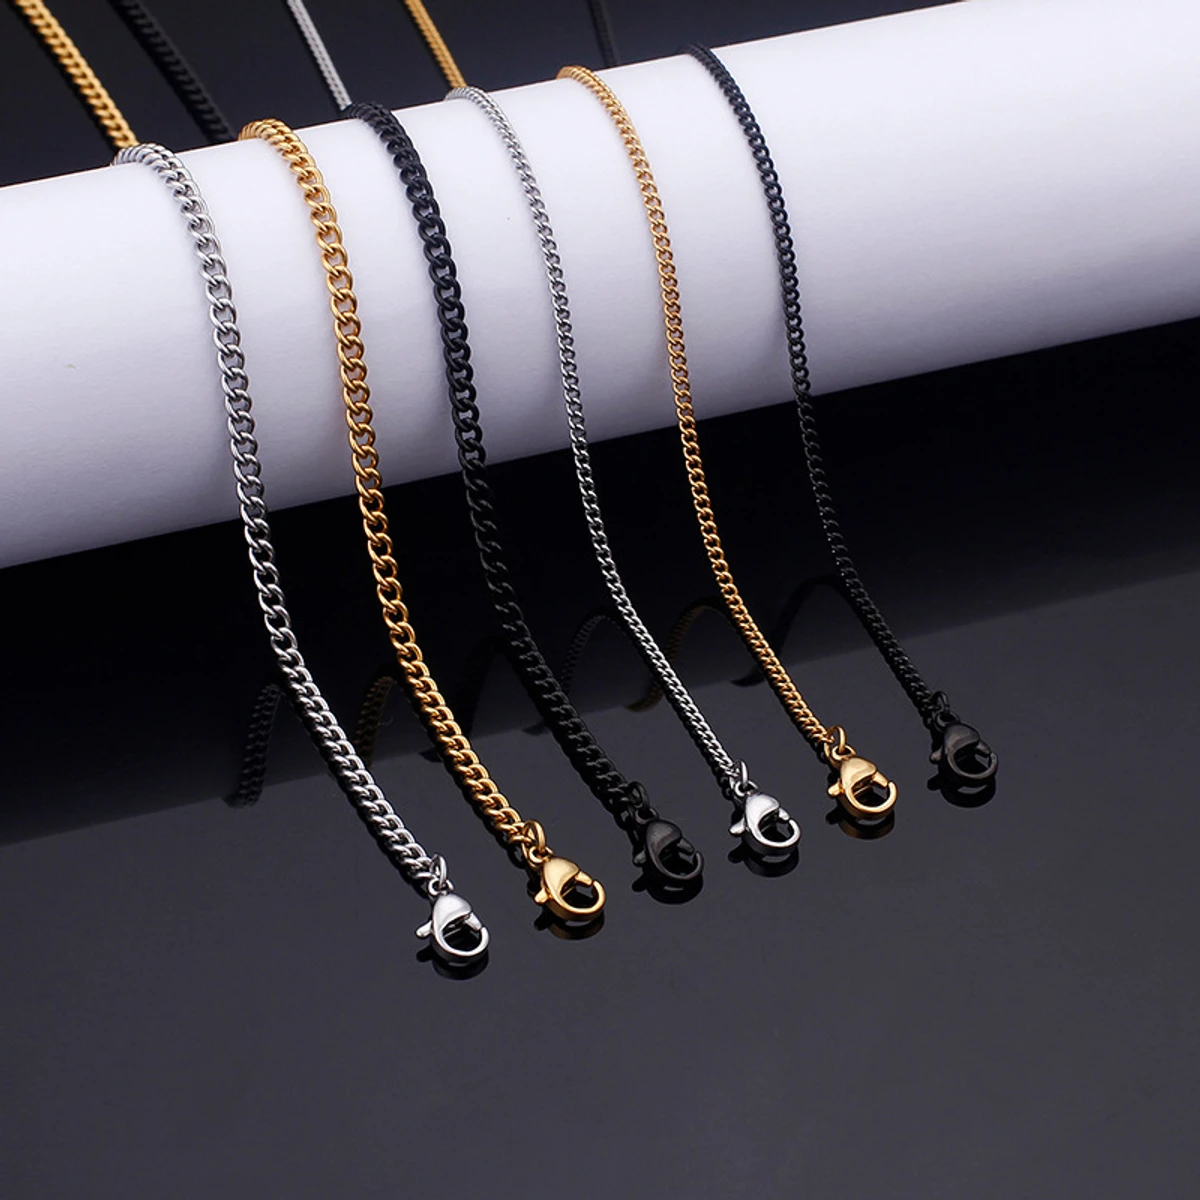 Classic Mens Necklace Stainless Steel Fashionable Chain